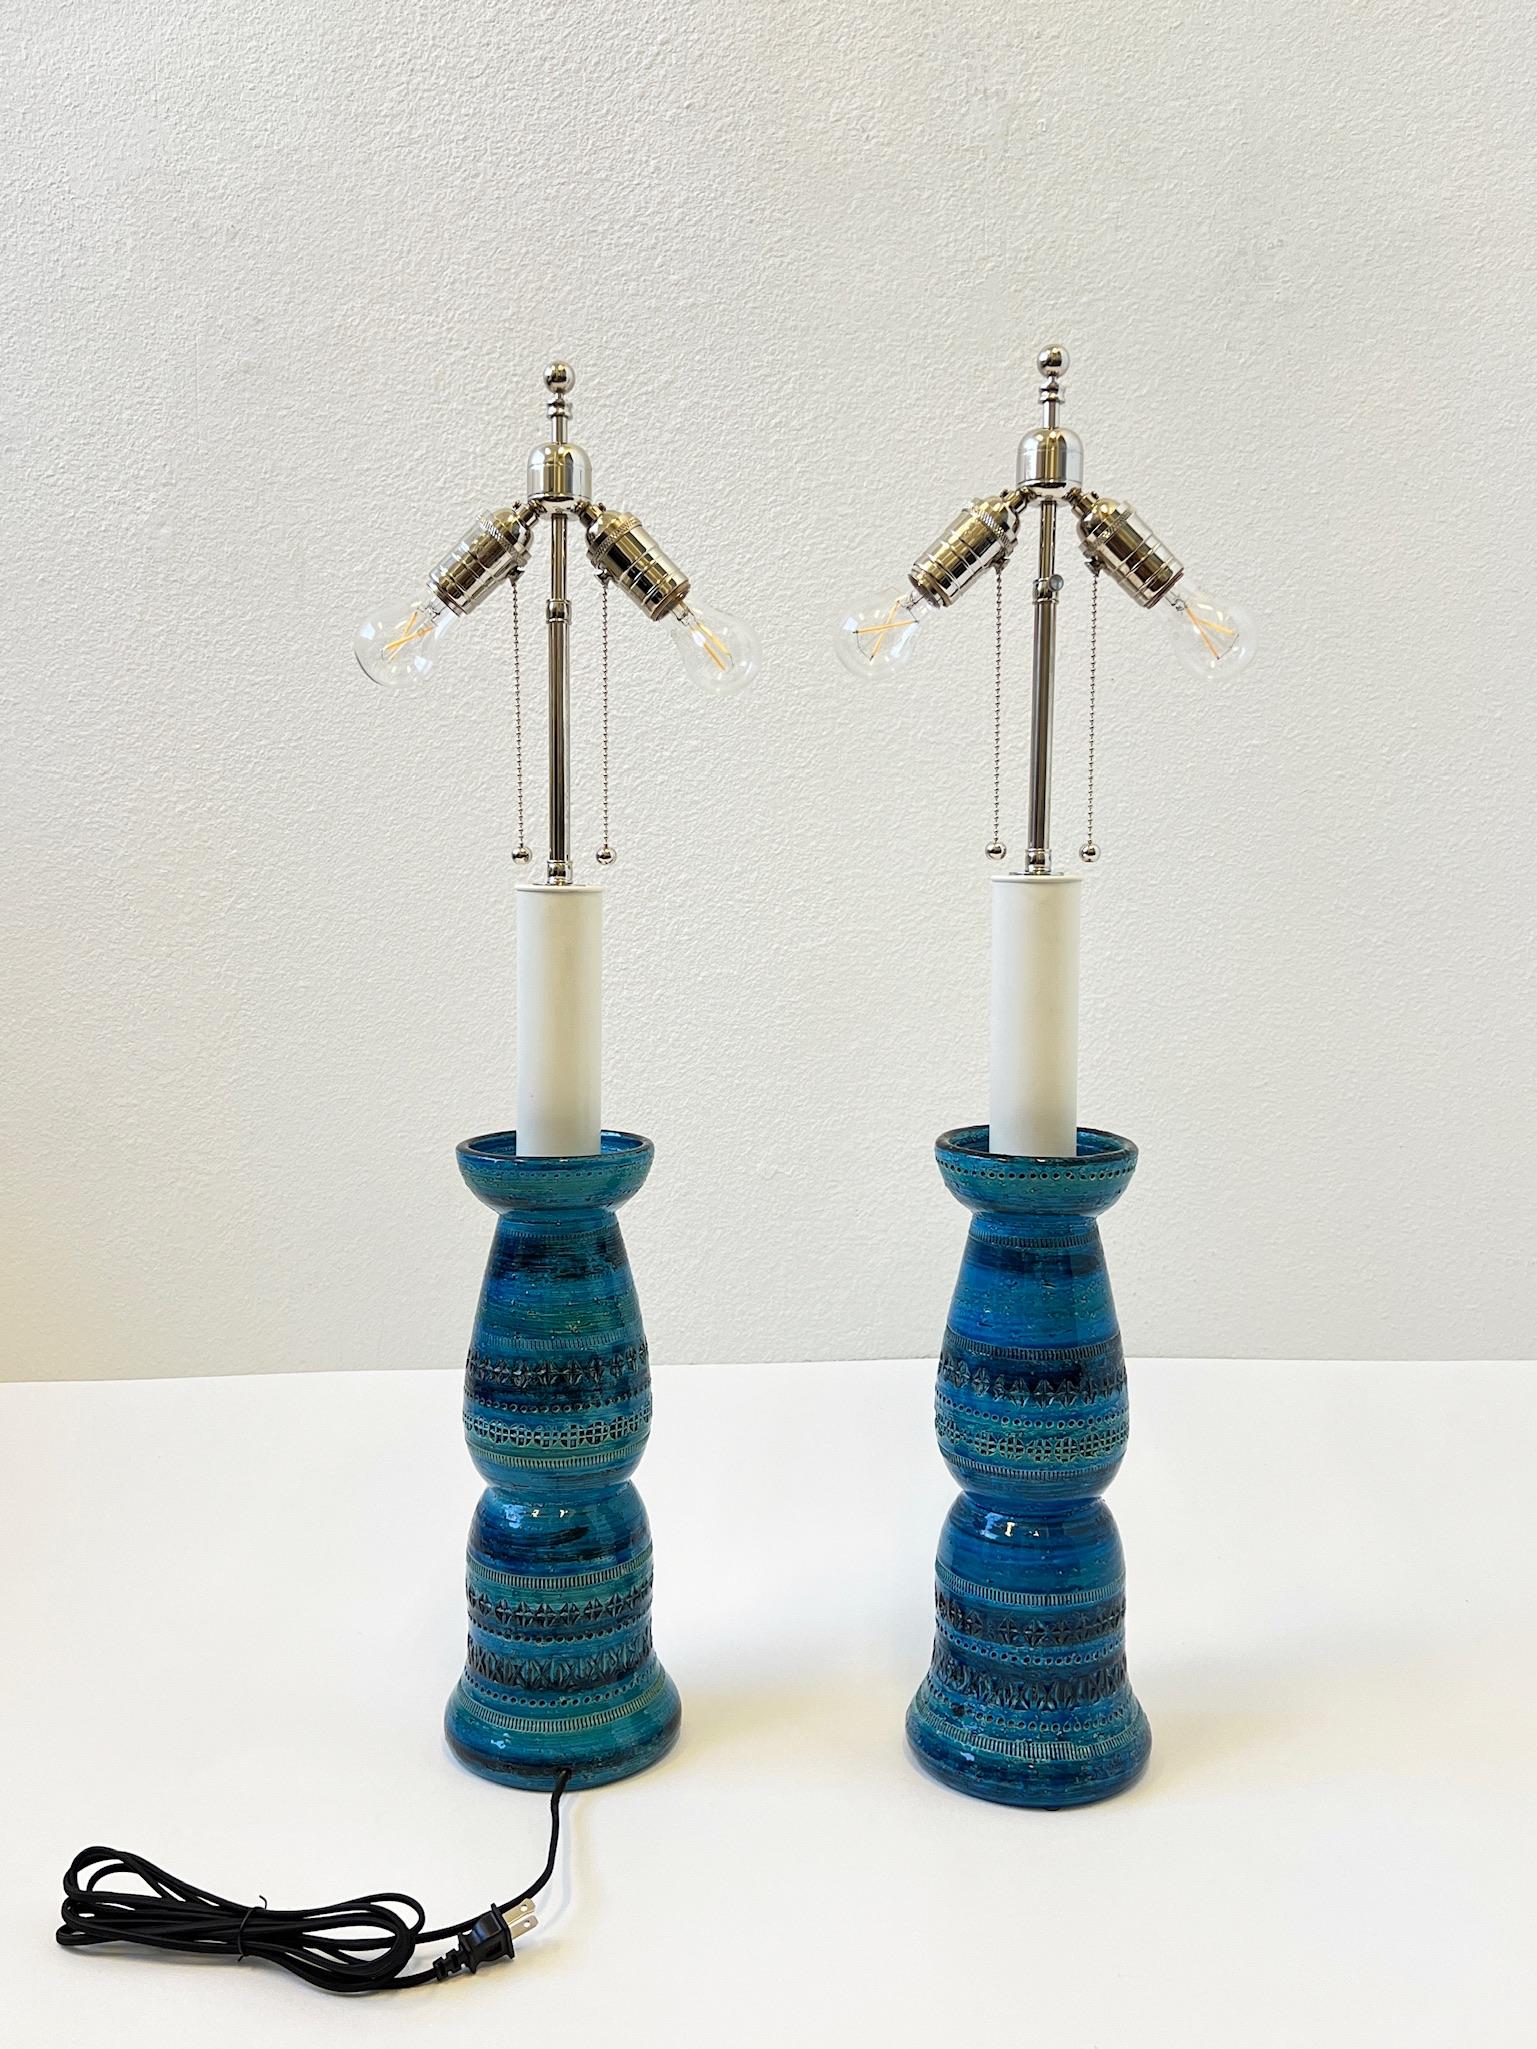 Mid-20th Century Pair of Italian Ceramic and Nickel Table Lamps by Aldo Londi for Bitossi